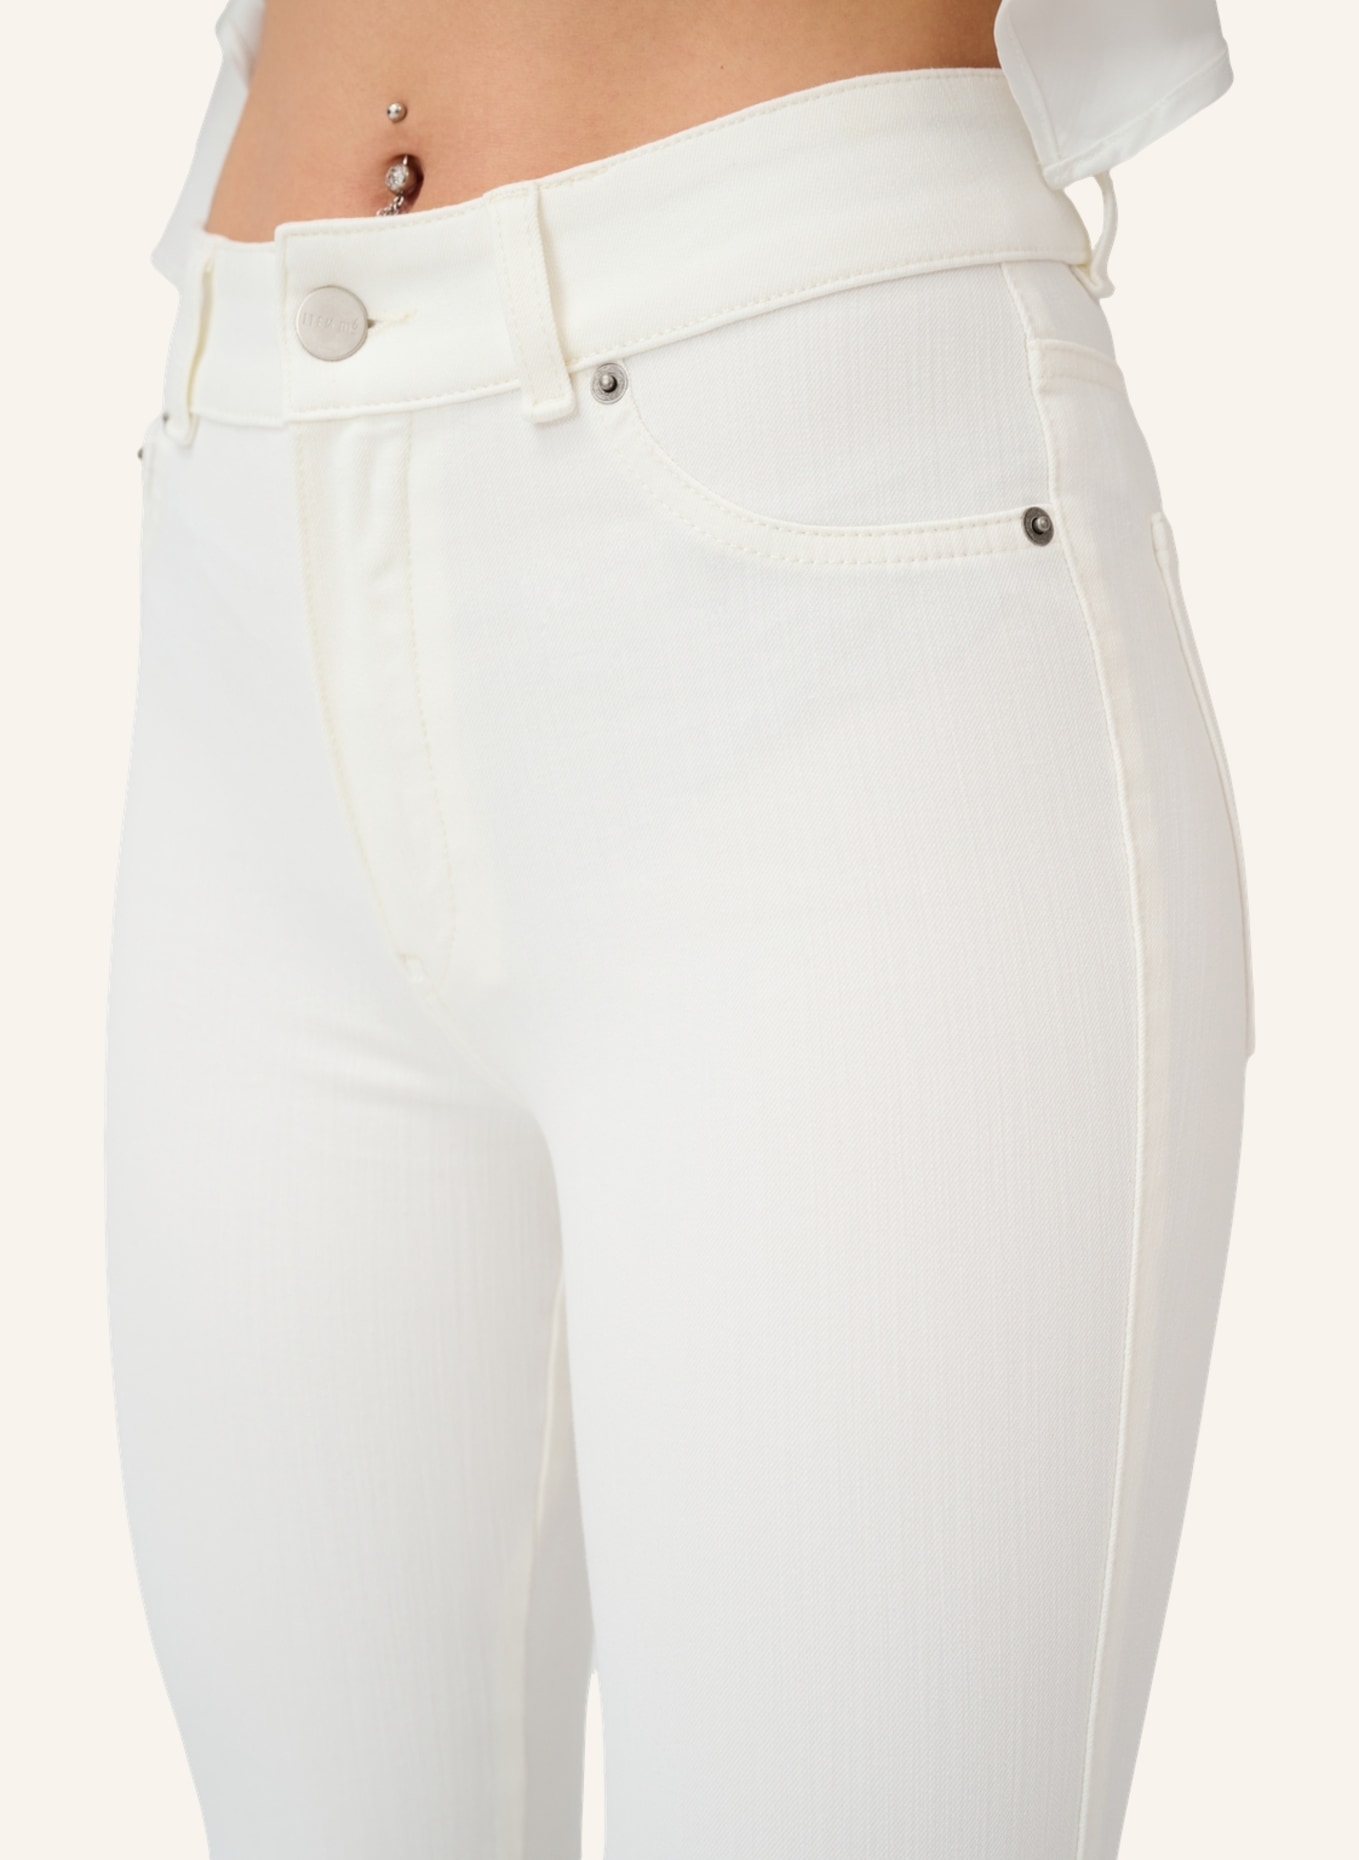 ITEM m6 7/8-Jeans CROPPED HIGH RISE mit Shaping-Effekt, Farbe: WEISS (Bild 5)